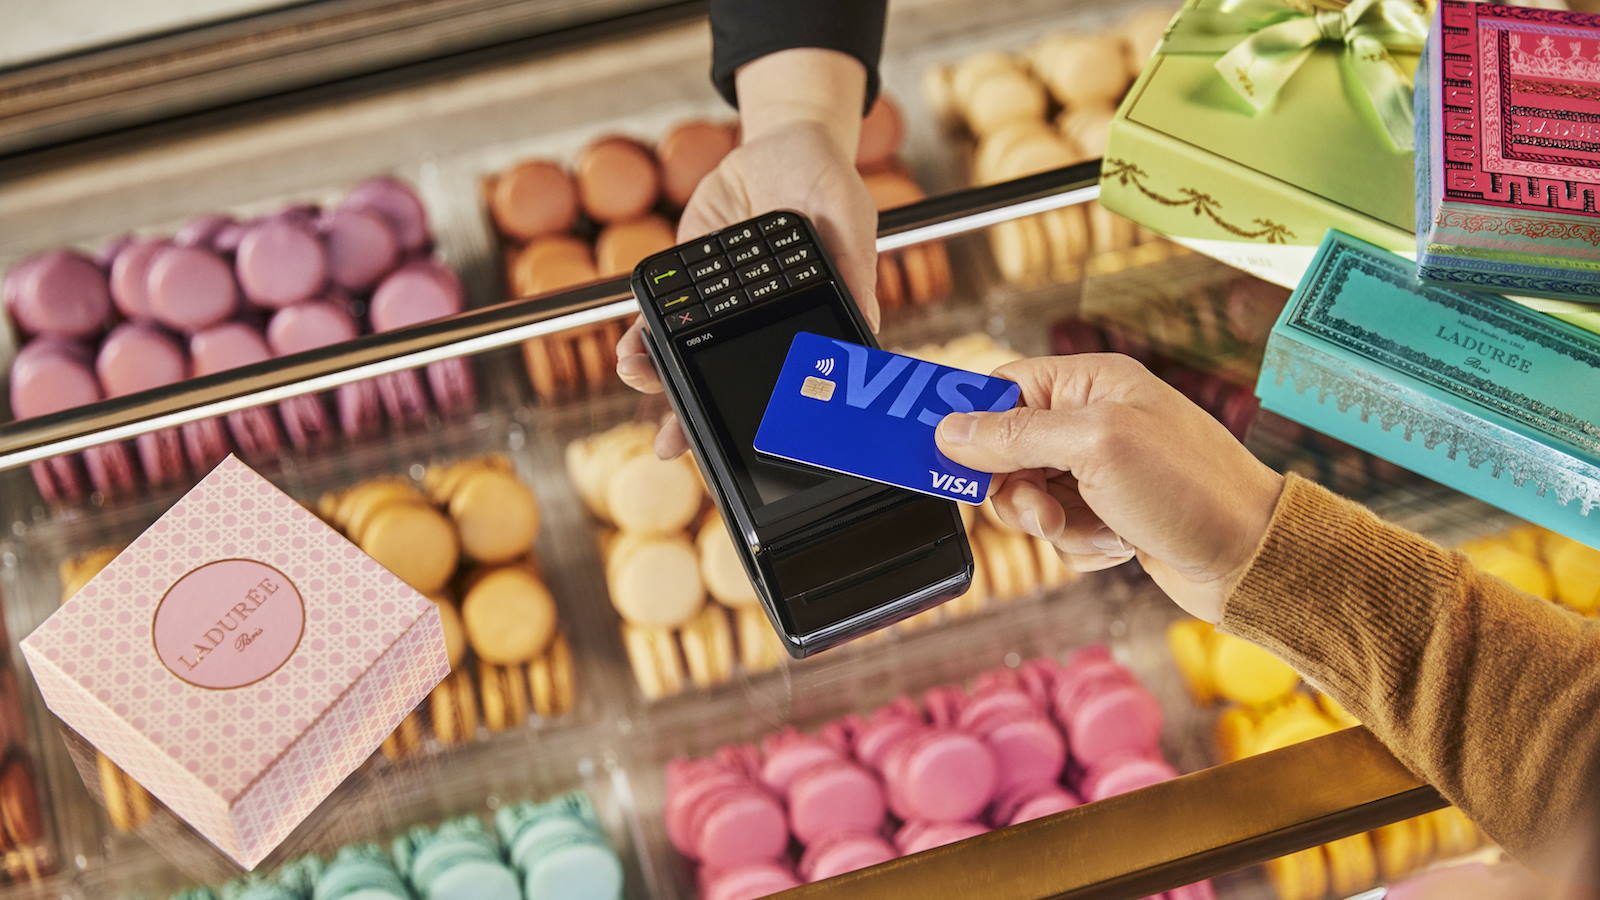 Paying for macaroons with contactless card